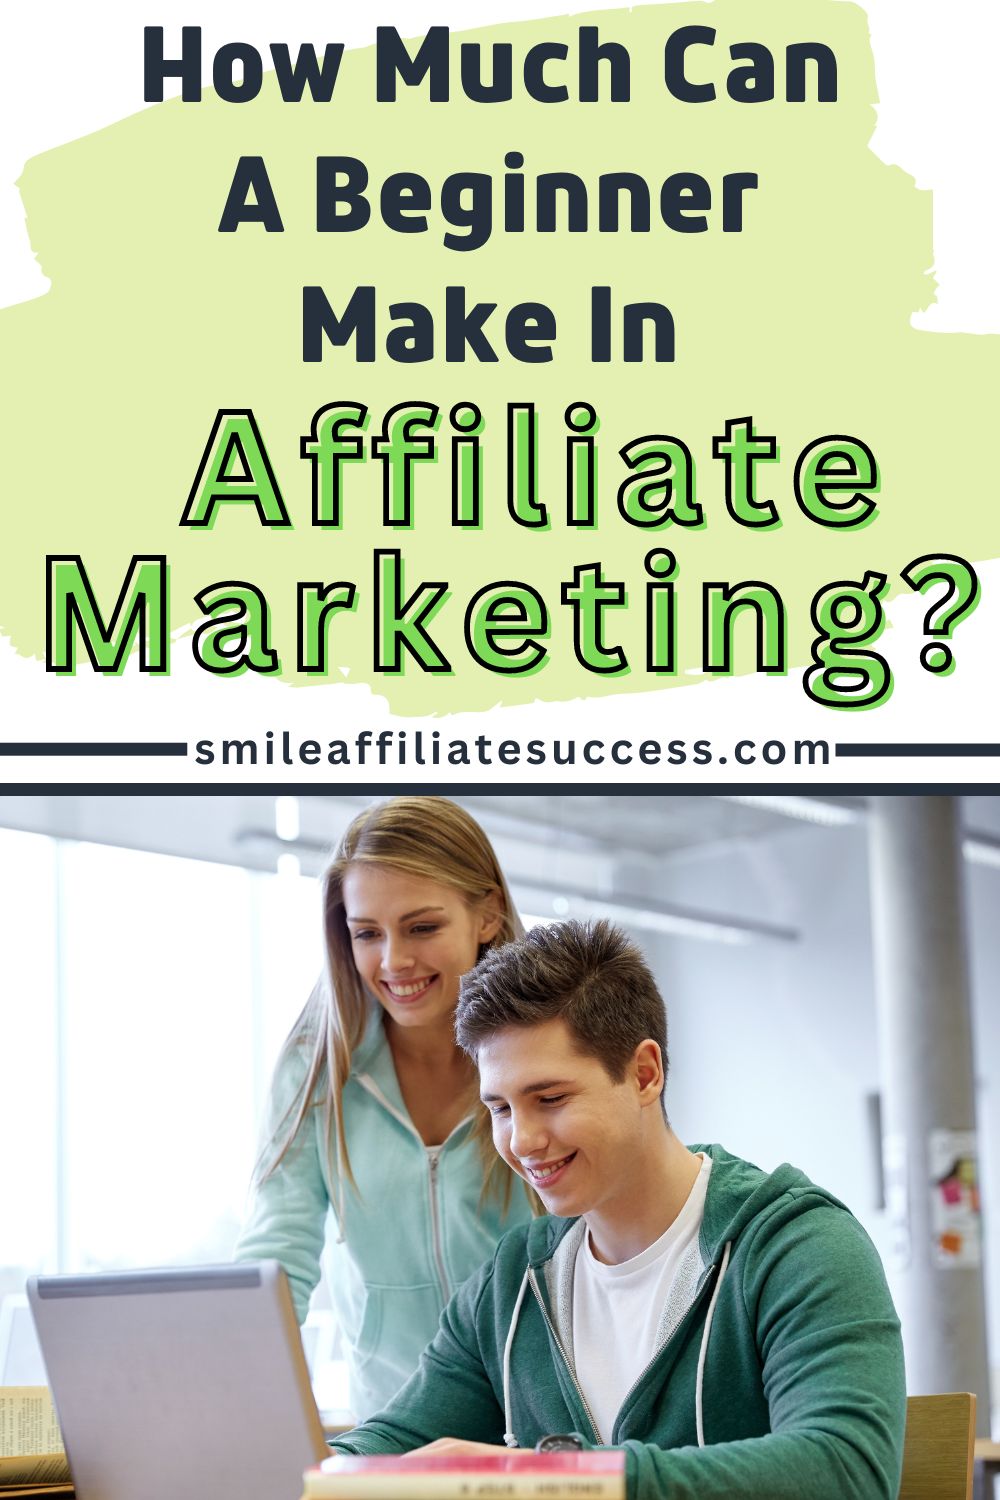 How Much Can A Beginner Make In Affiliate Marketing?